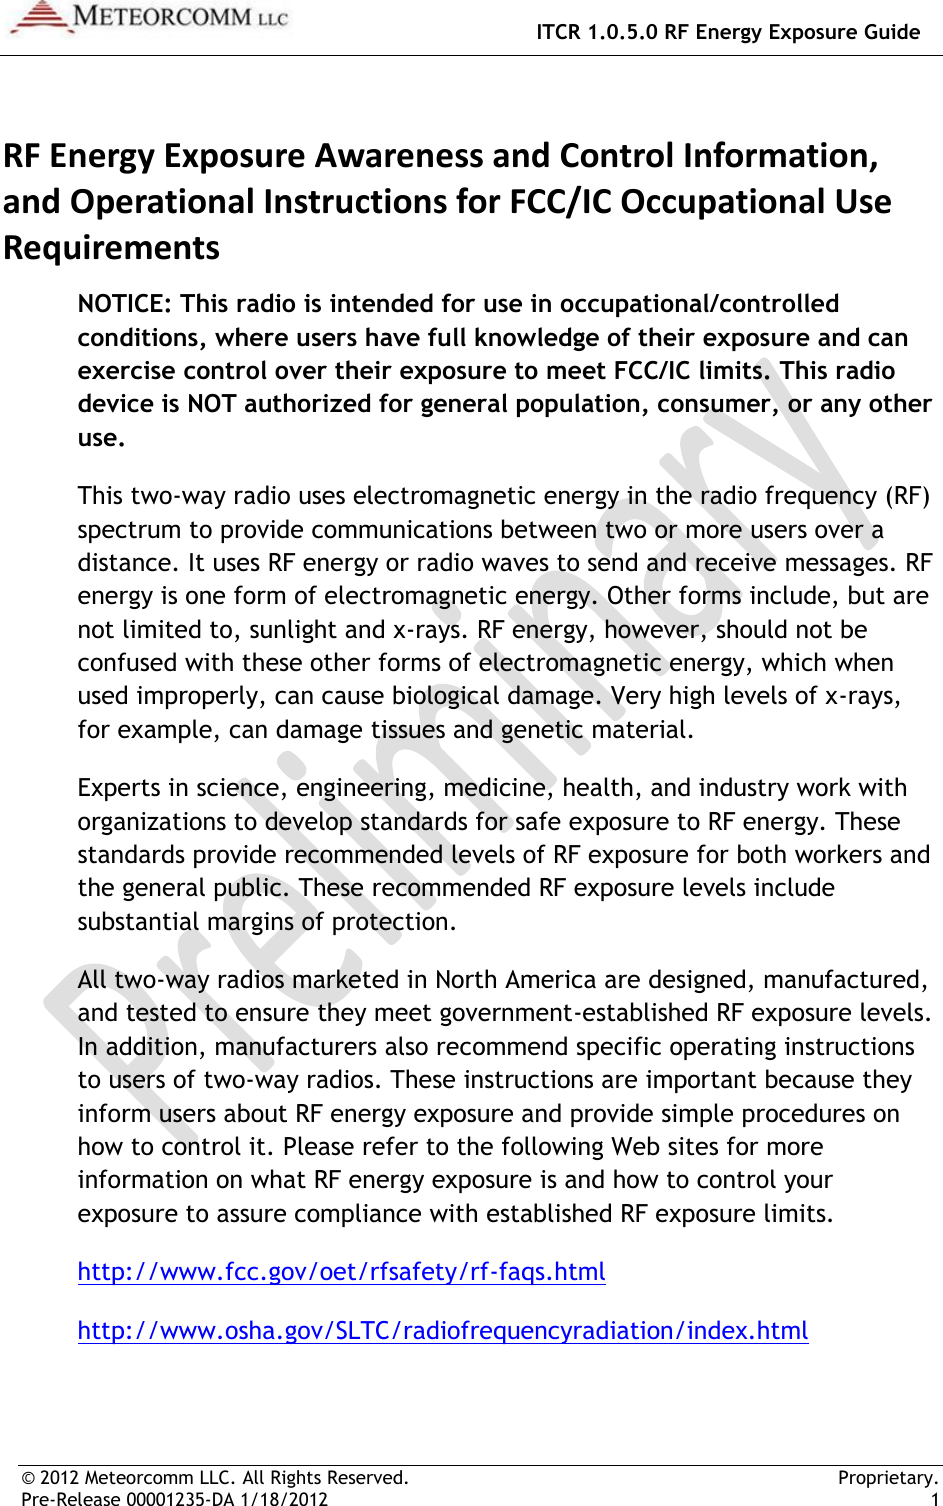   ITCR 1.0.5.0 RF Energy Exposure Guide © 2012 Meteorcomm LLC. All Rights Reserved.     Proprietary. Pre-Release 00001235-DA 1/18/2012    1  RF Energy Exposure Awareness and Control Information, and Operational Instructions for FCC/IC Occupational Use Requirements NOTICE: This radio is intended for use in occupational/controlled conditions, where users have full knowledge of their exposure and can exercise control over their exposure to meet FCC/IC limits. This radio device is NOT authorized for general population, consumer, or any other use. This two-way radio uses electromagnetic energy in the radio frequency (RF) spectrum to provide communications between two or more users over a distance. It uses RF energy or radio waves to send and receive messages. RF energy is one form of electromagnetic energy. Other forms include, but are not limited to, sunlight and x-rays. RF energy, however, should not be confused with these other forms of electromagnetic energy, which when used improperly, can cause biological damage. Very high levels of x-rays, for example, can damage tissues and genetic material. Experts in science, engineering, medicine, health, and industry work with organizations to develop standards for safe exposure to RF energy. These standards provide recommended levels of RF exposure for both workers and the general public. These recommended RF exposure levels include substantial margins of protection. All two-way radios marketed in North America are designed, manufactured, and tested to ensure they meet government-established RF exposure levels. In addition, manufacturers also recommend specific operating instructions to users of two-way radios. These instructions are important because they inform users about RF energy exposure and provide simple procedures on how to control it. Please refer to the following Web sites for more information on what RF energy exposure is and how to control your exposure to assure compliance with established RF exposure limits. http://www.fcc.gov/oet/rfsafety/rf-faqs.html http://www.osha.gov/SLTC/radiofrequencyradiation/index.html  